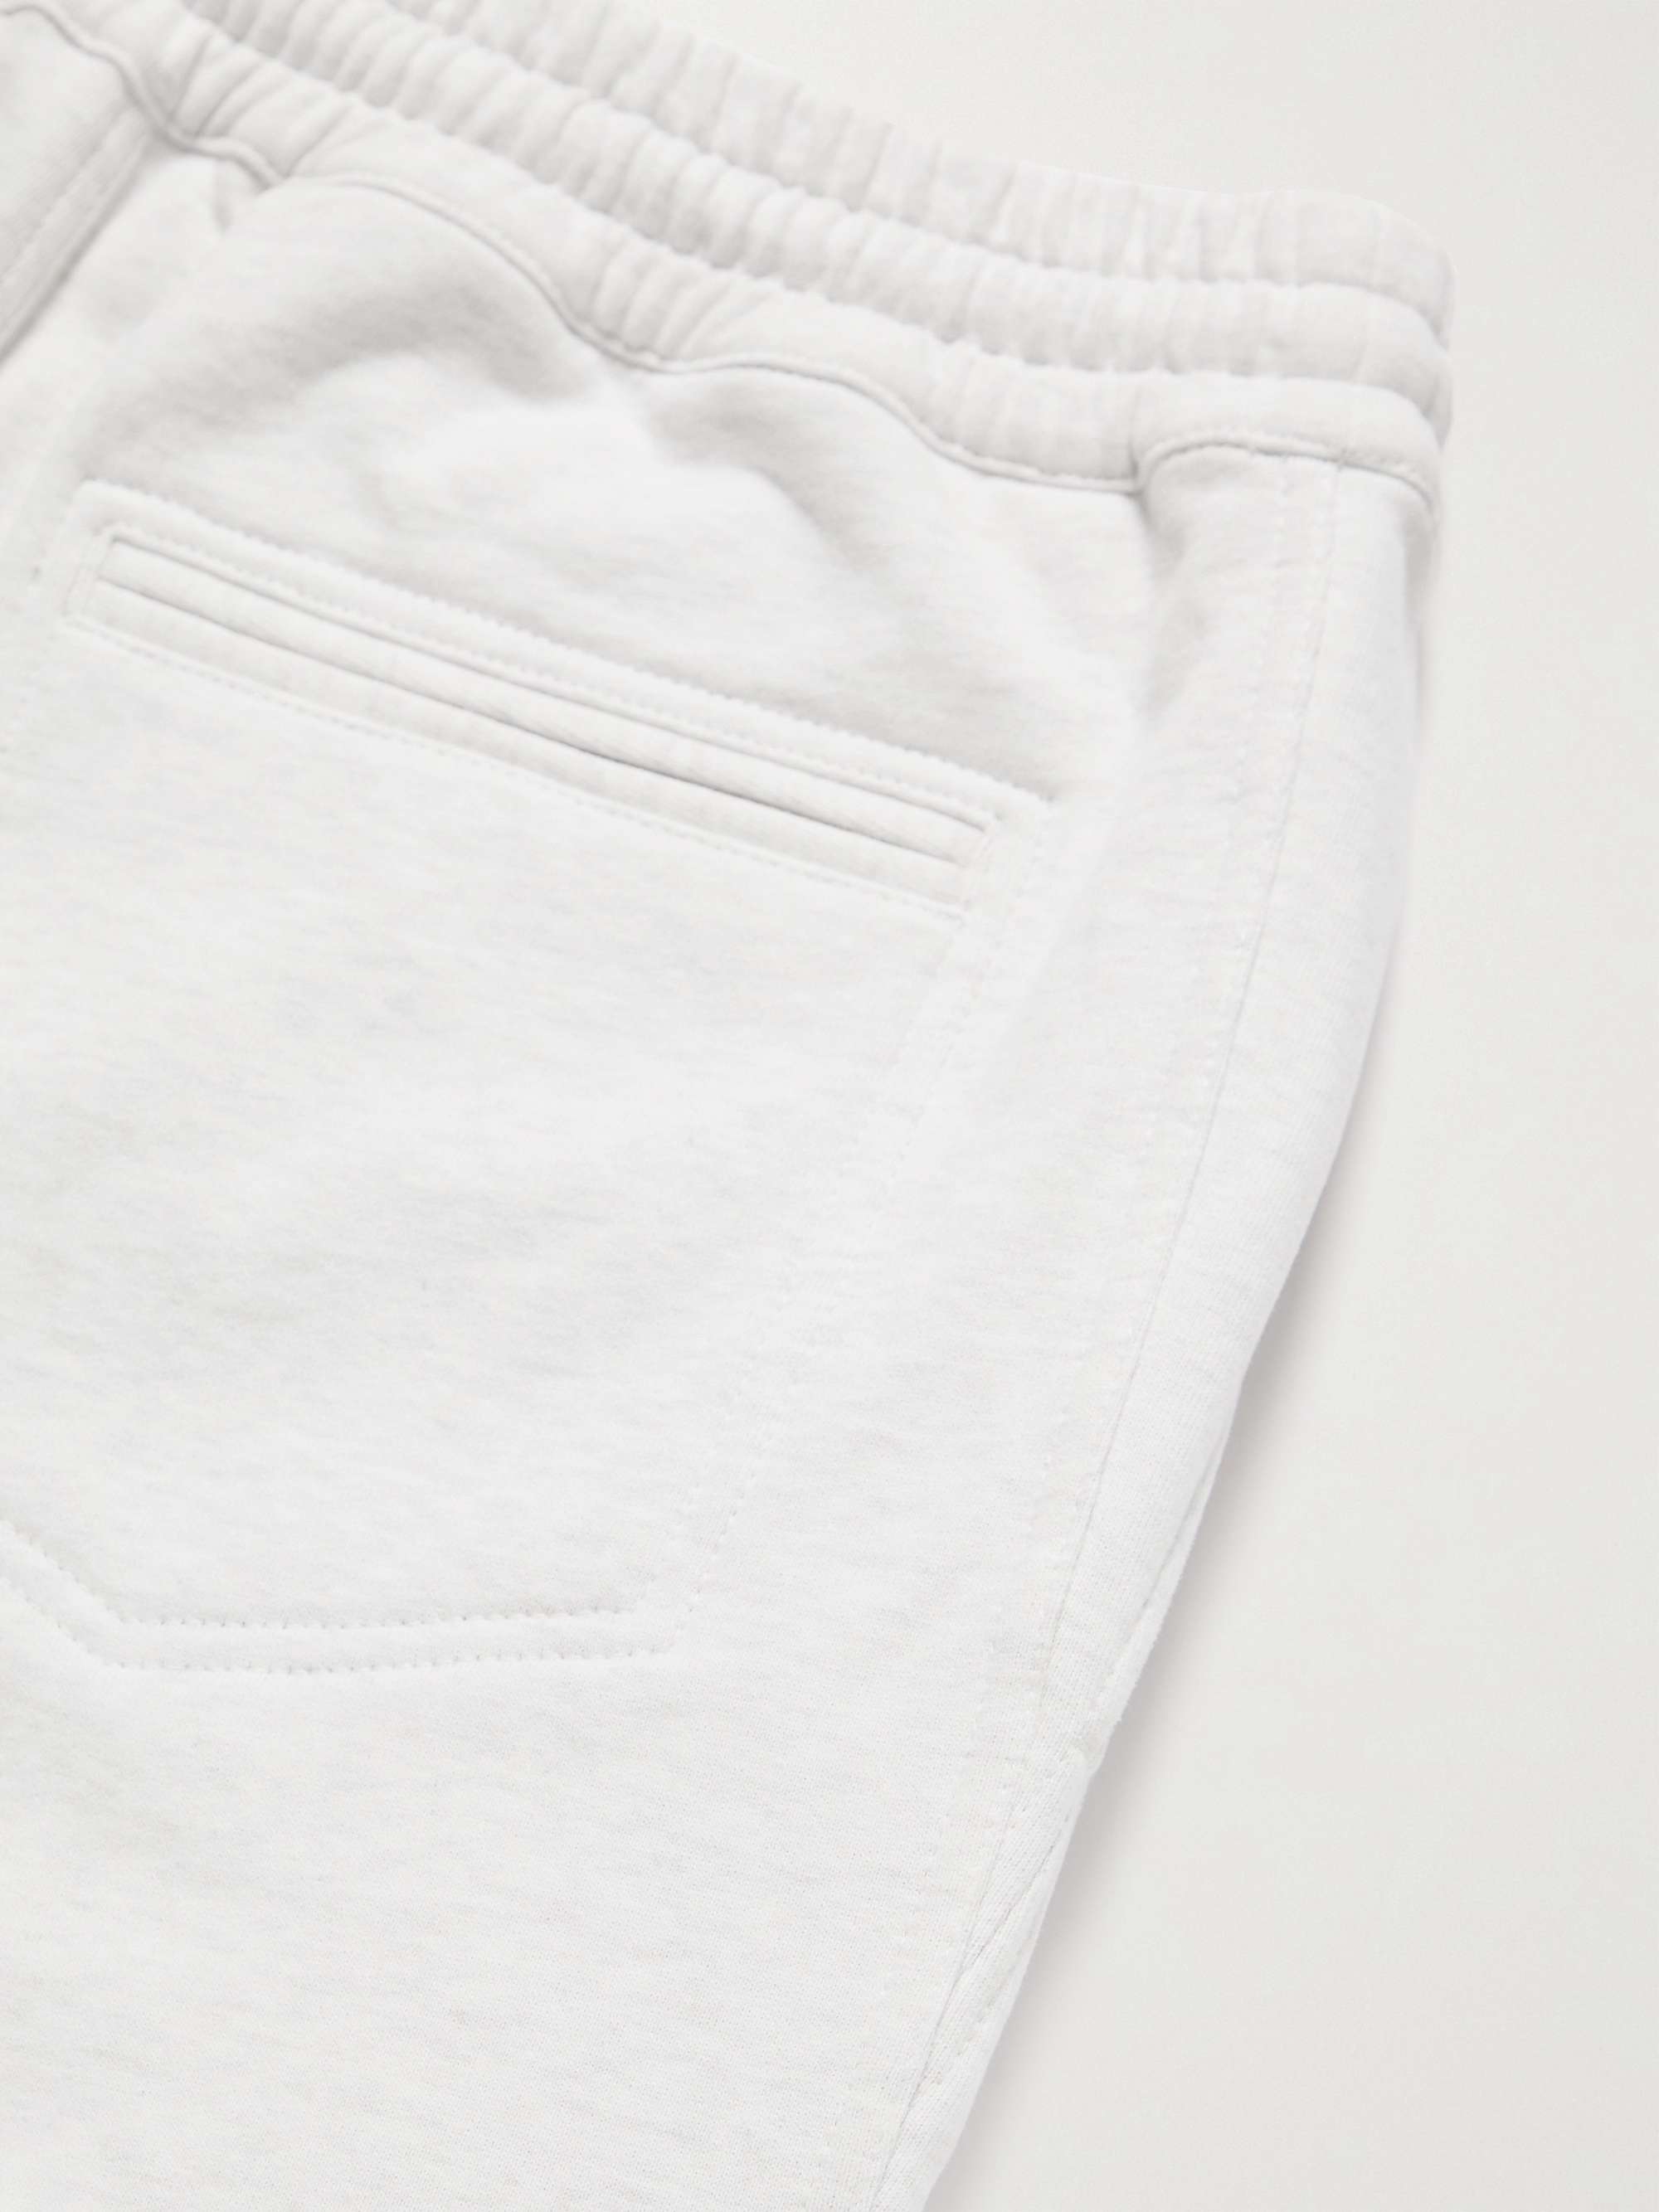 BRUNELLO CUCINELLI Tapered Pleated Cotton-Jersey Sweatpants